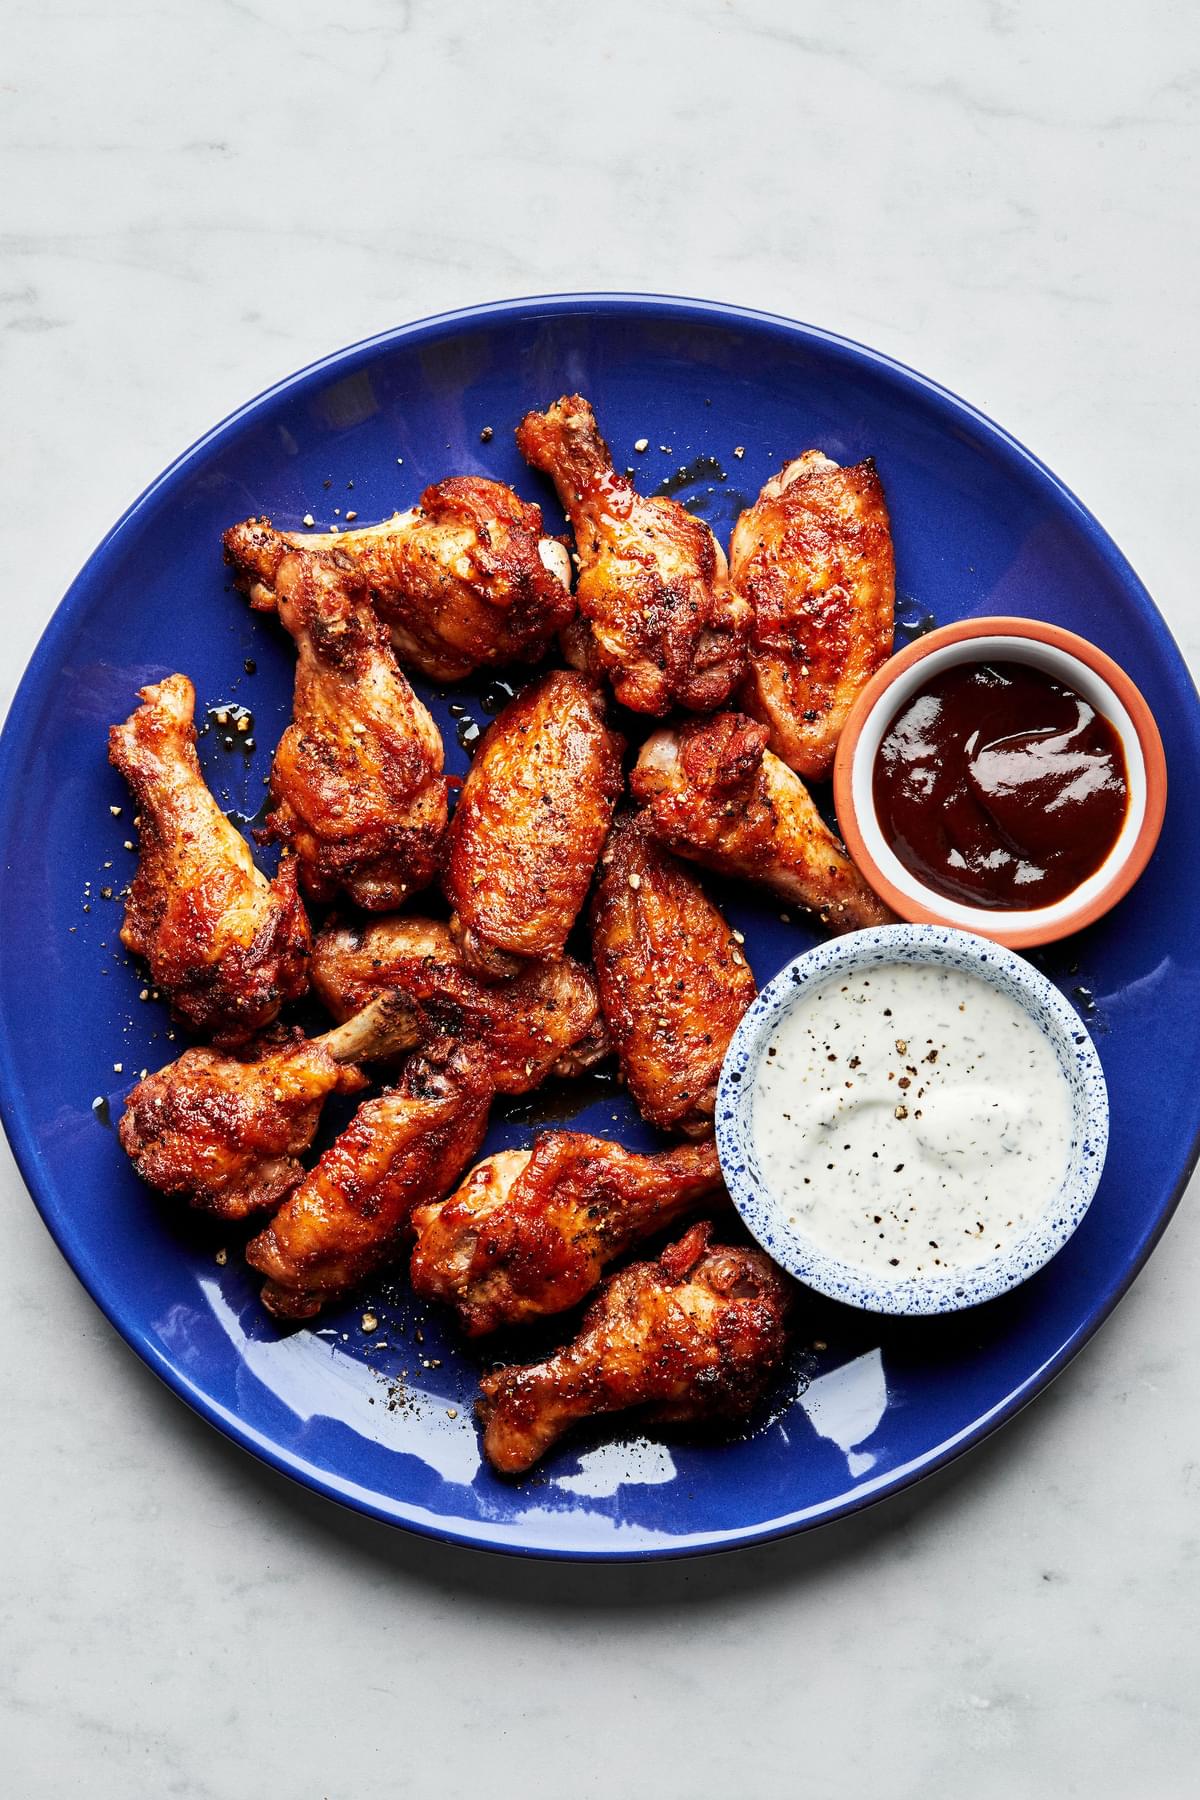 Homemade baked chicken wings on a plate served with ranch dressing and bbq sauce in small bowls